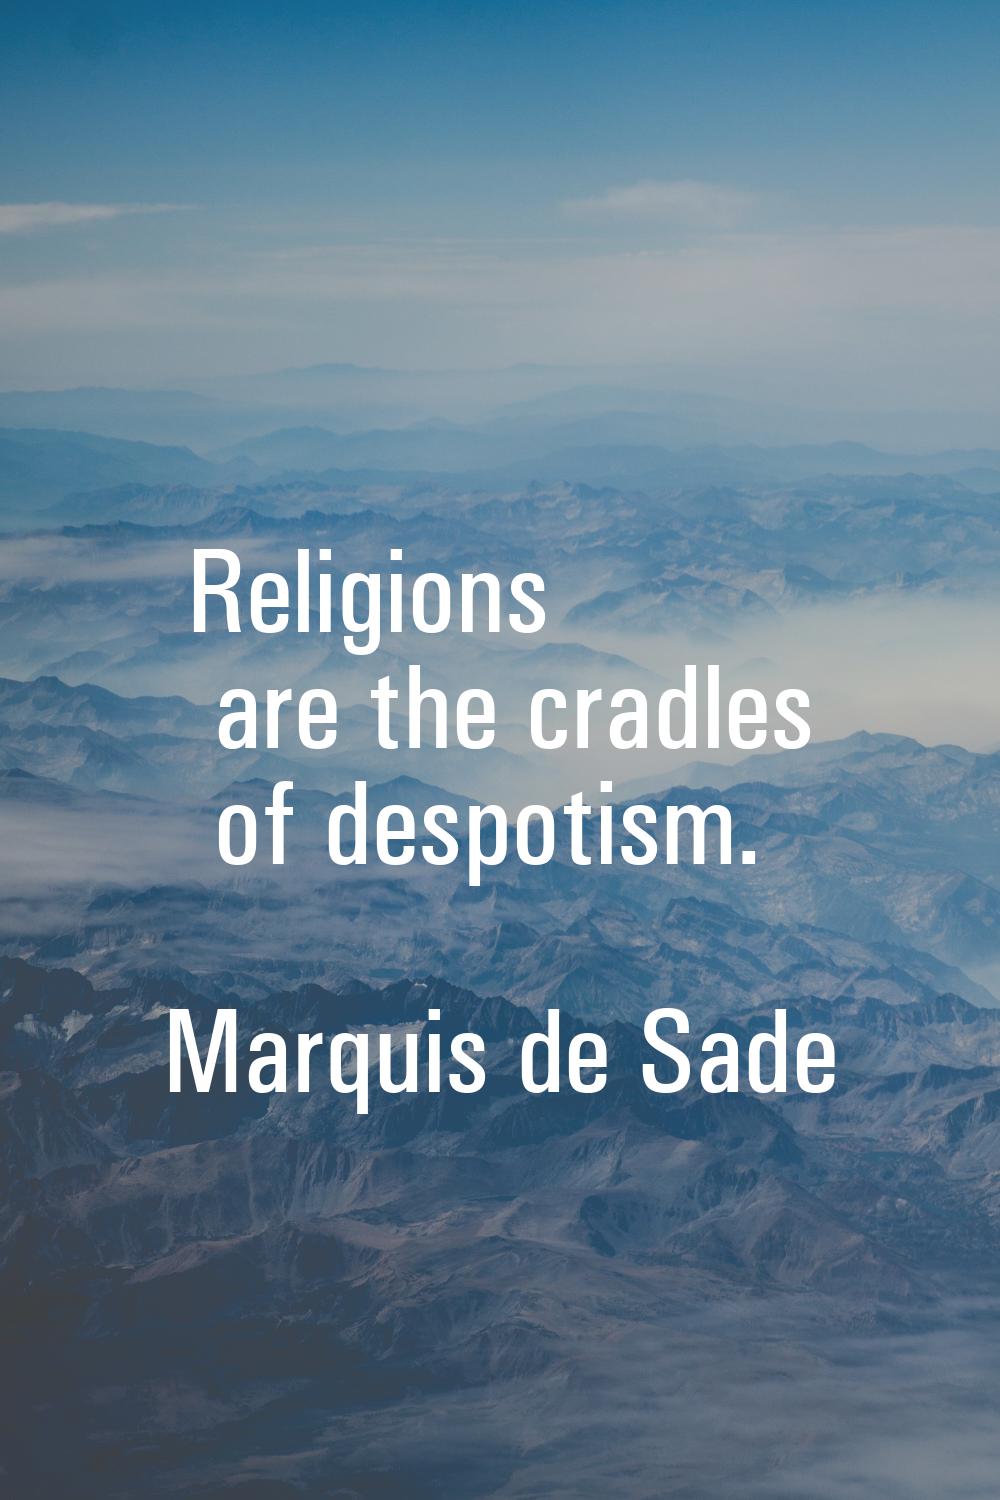 Religions are the cradles of despotism.